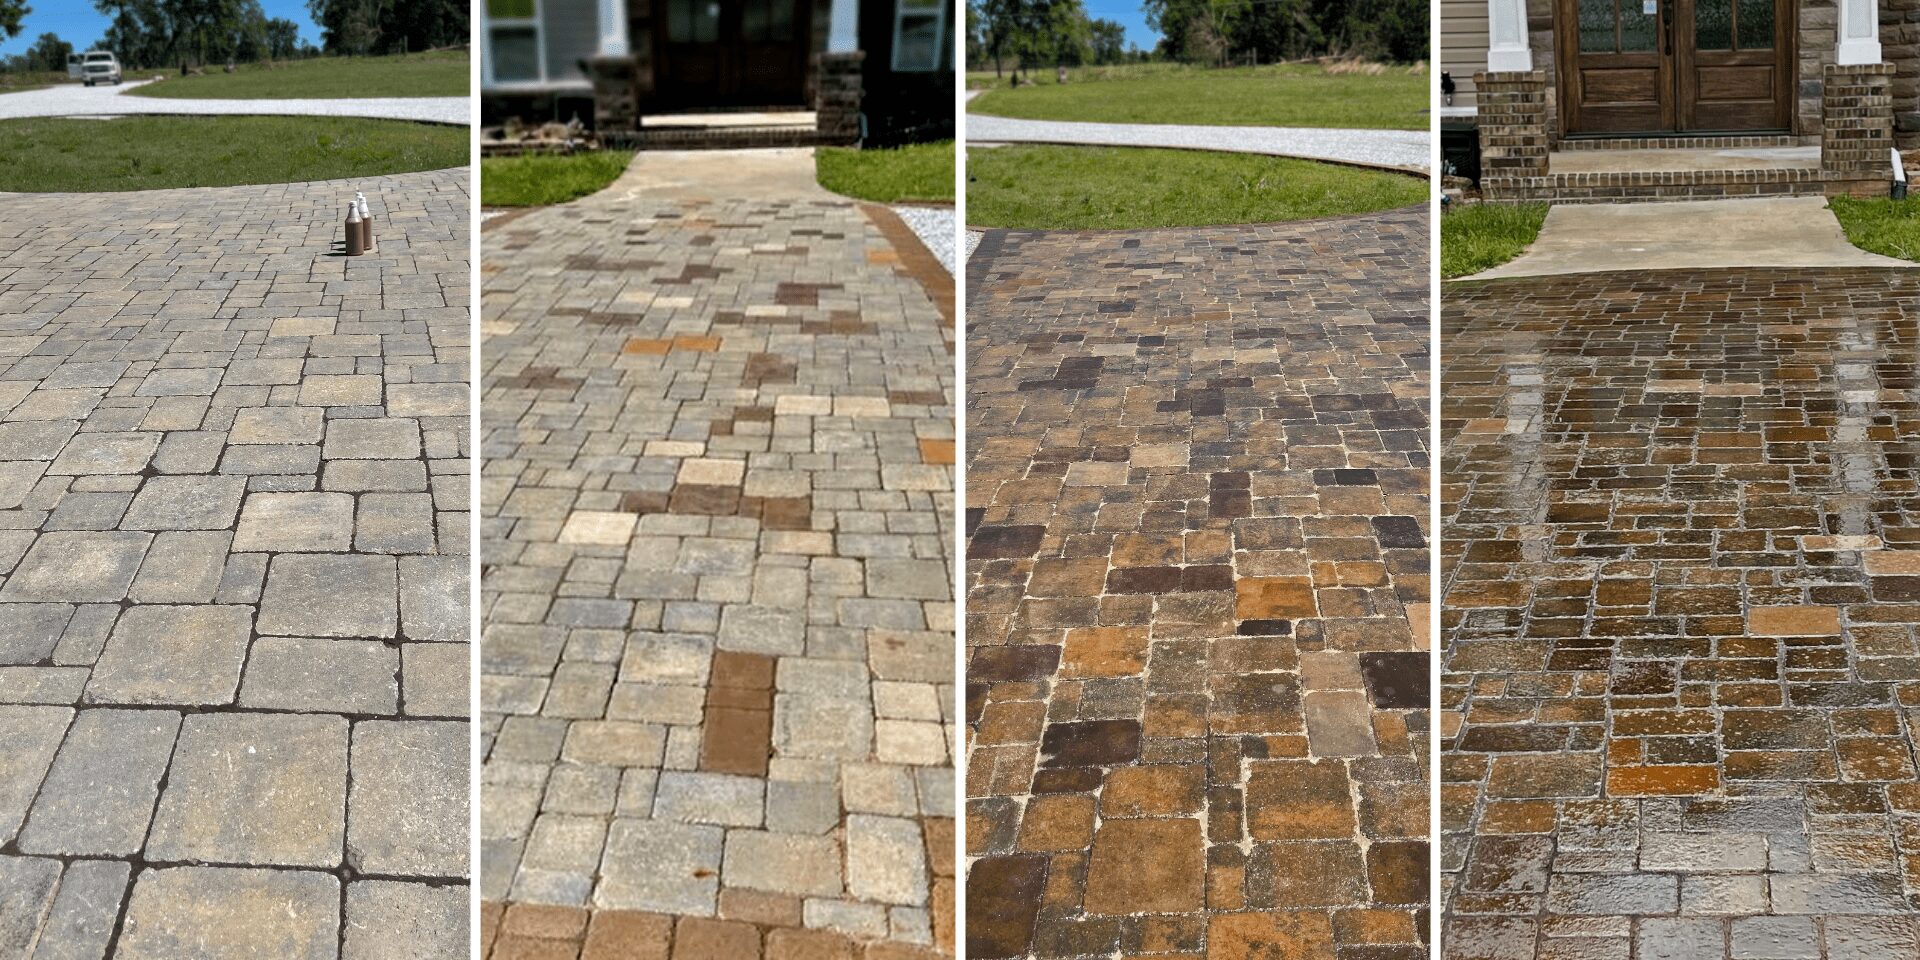 Portico - Driveway - Staining Photos Step by Step